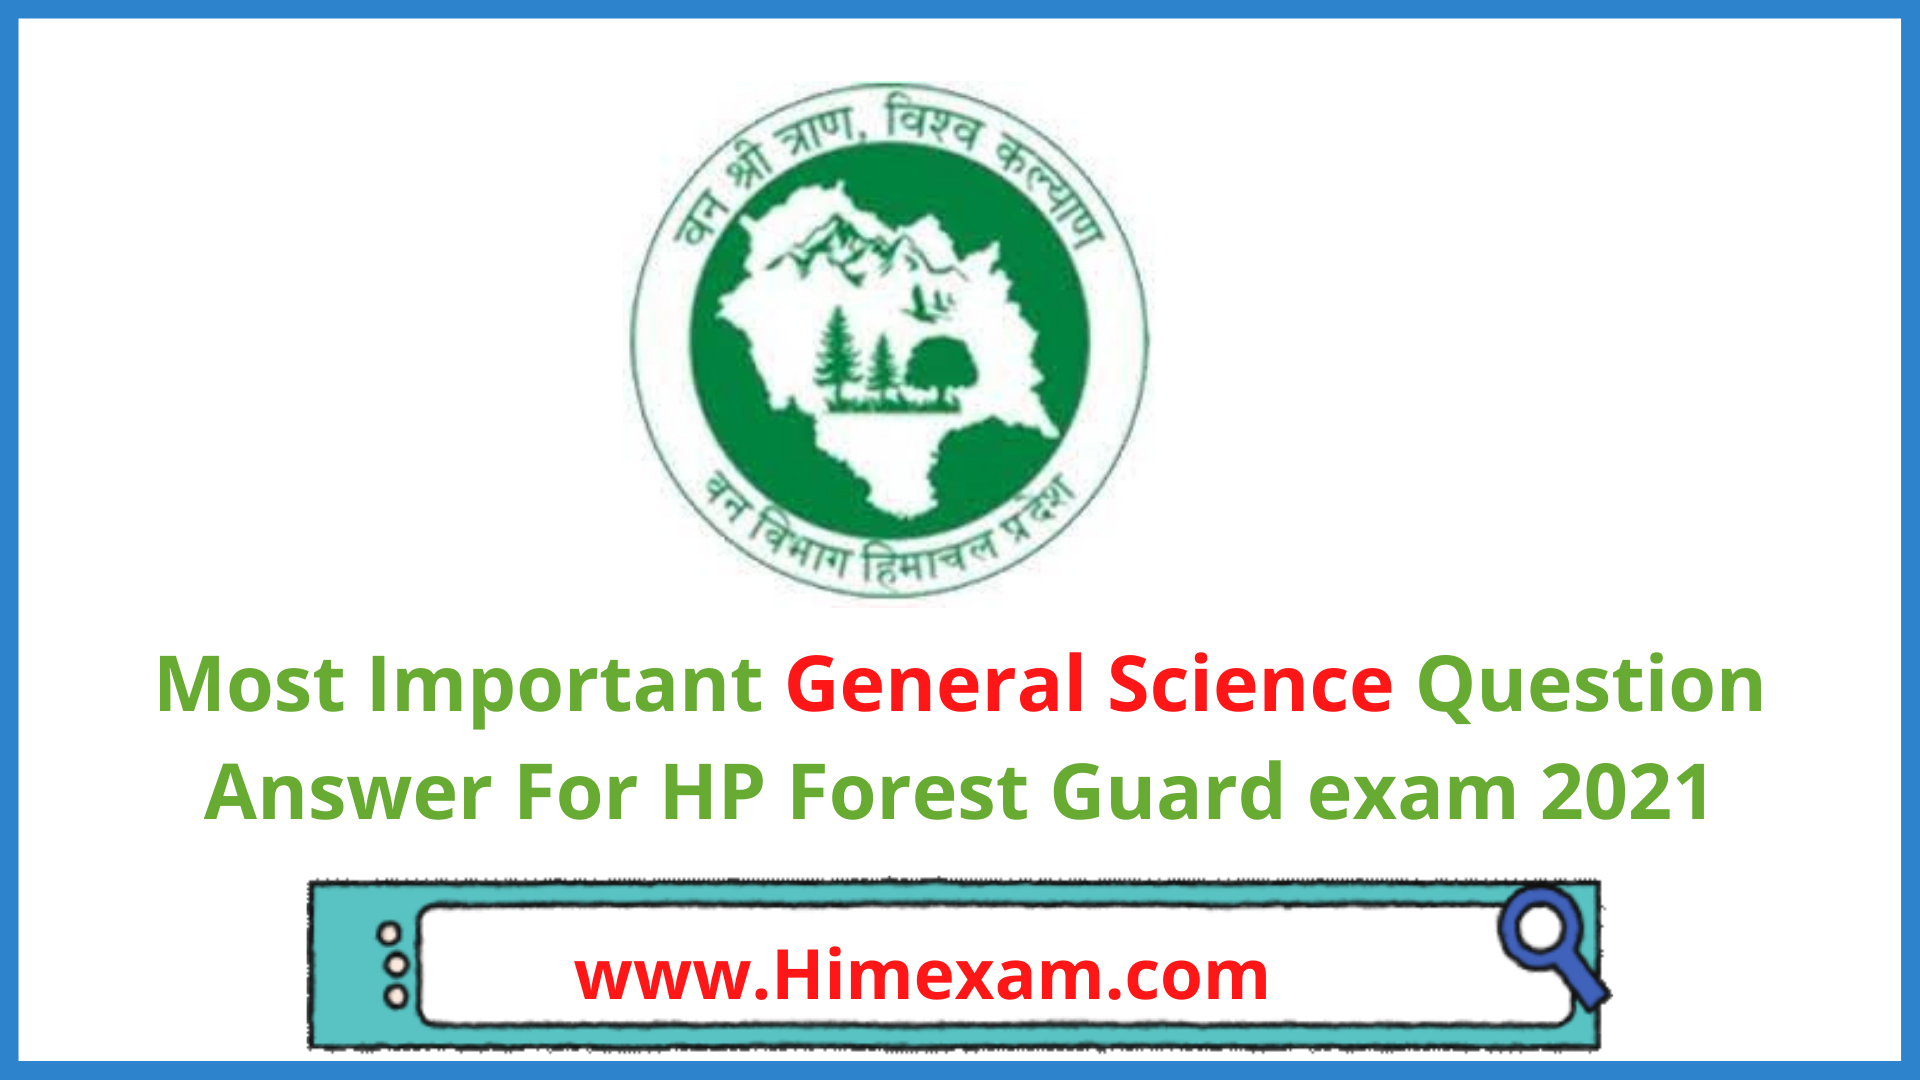 Most Important General Science Question Answer For HP Forest Guard exam 2021